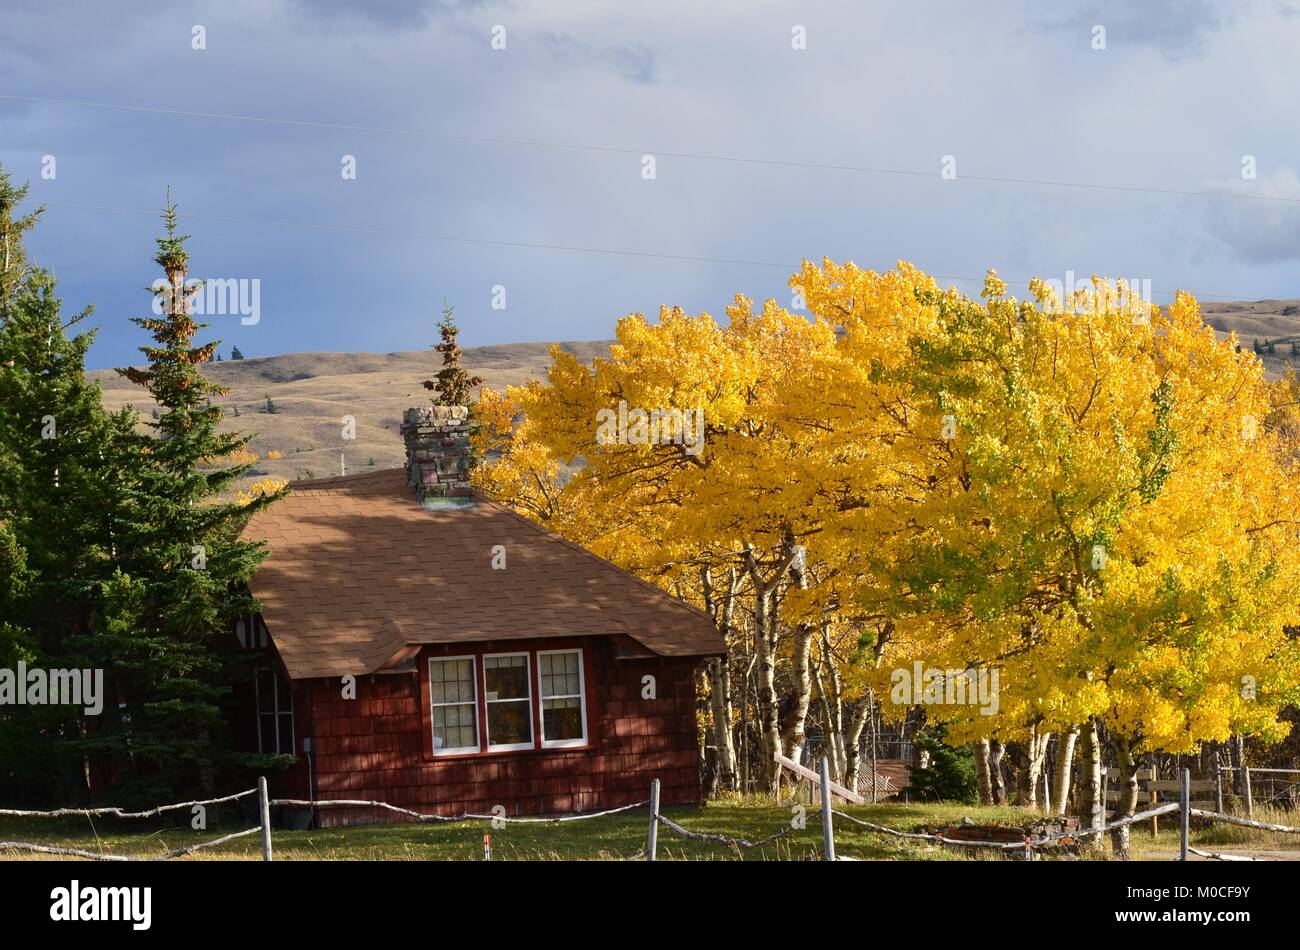 An old historic mountain cabin, sits nestled among the autumn colored trees Stock Photo